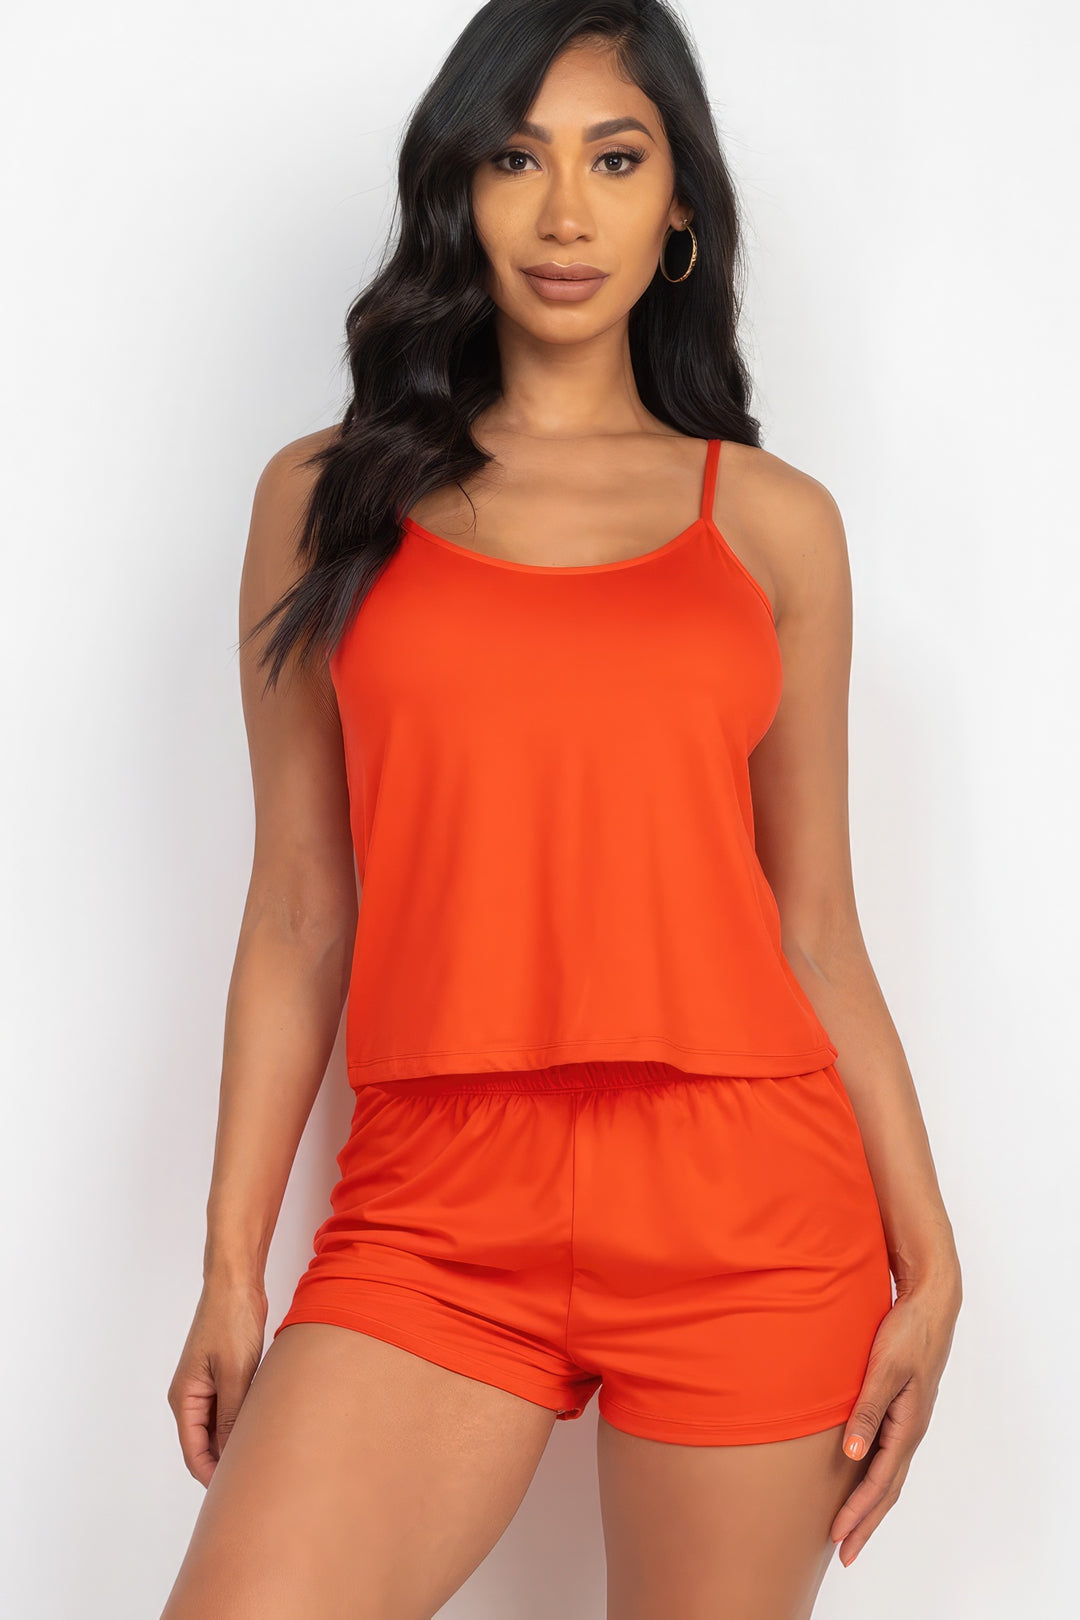 Cami Top & Shorts Set in Red Alert Jersey Fabric | Sleeveless Cami & Matching Shorts | Sizes S-L